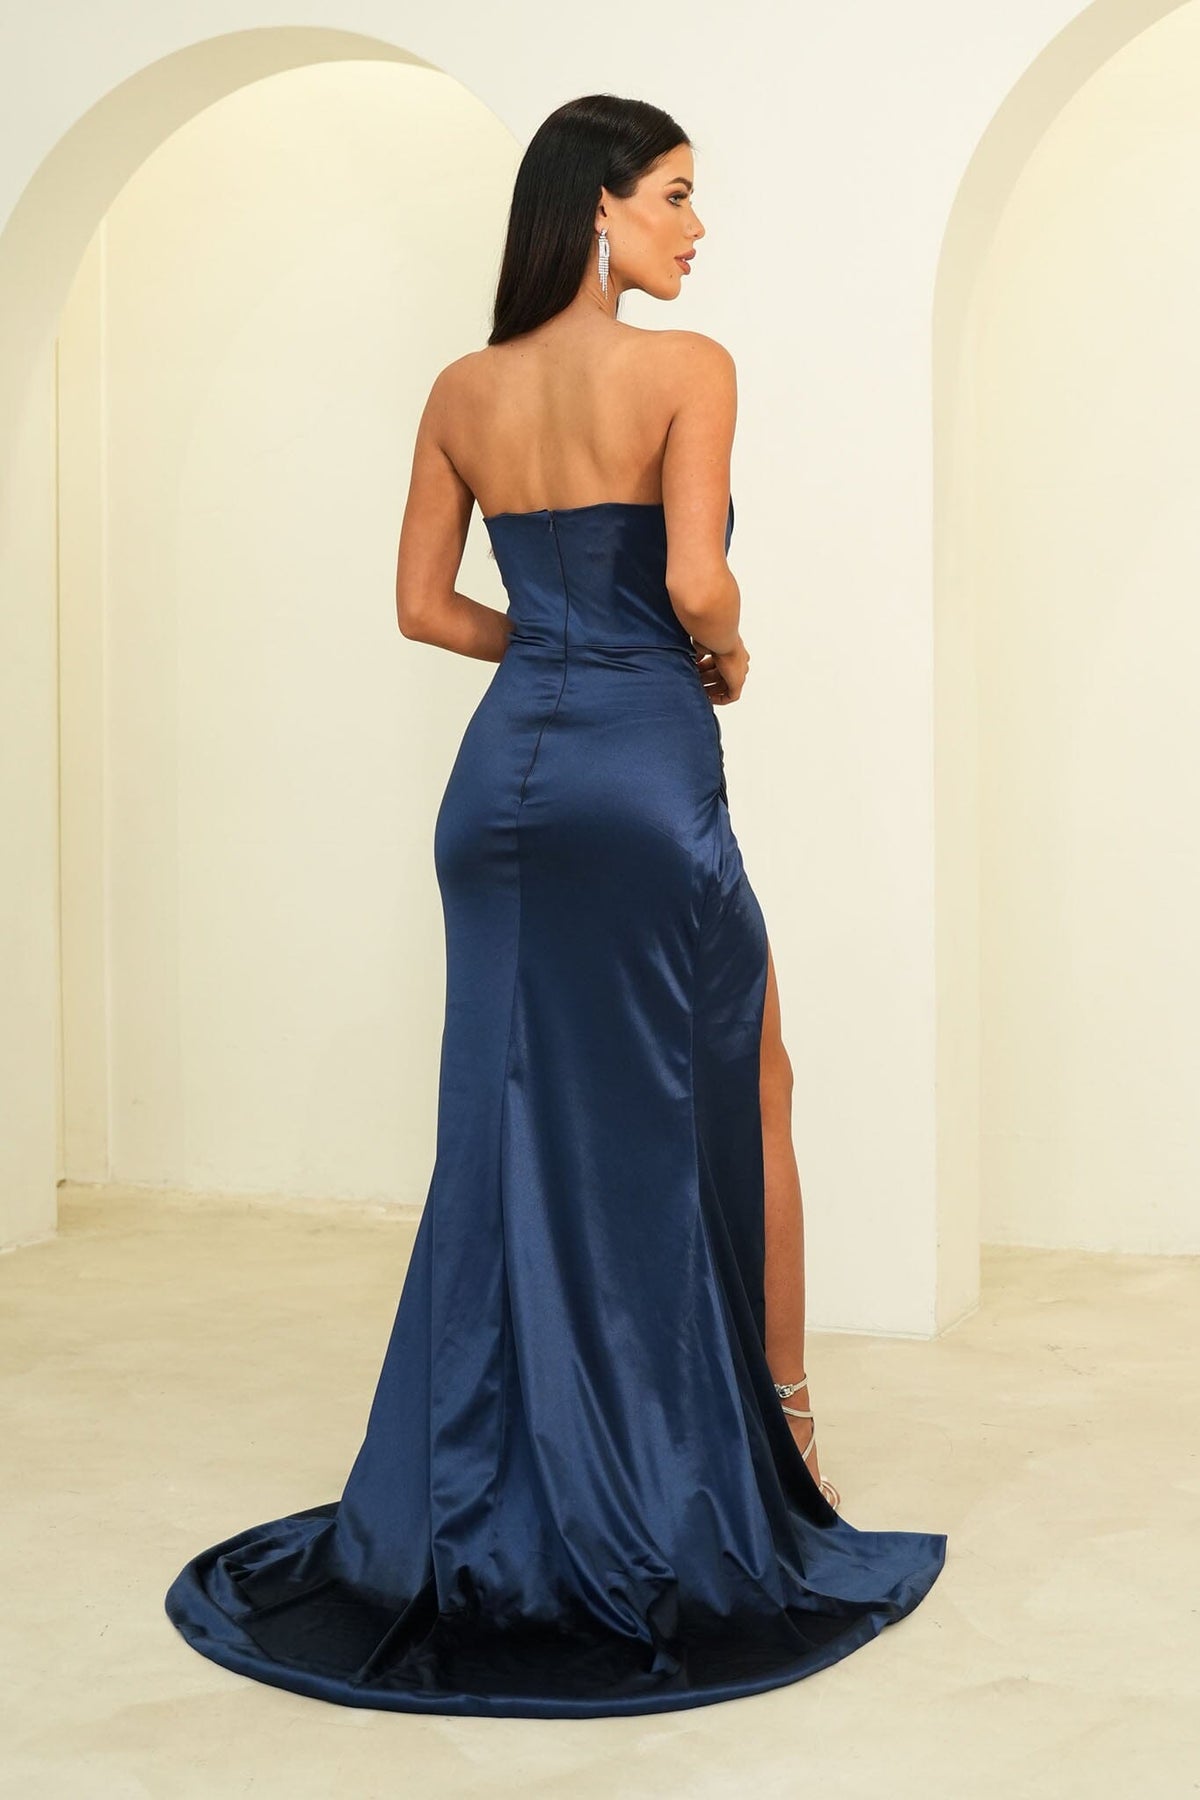 Back Image of Navy Fitted Stretch Satin Full Length Evening Gown with Strapless Neckline and Side Slit